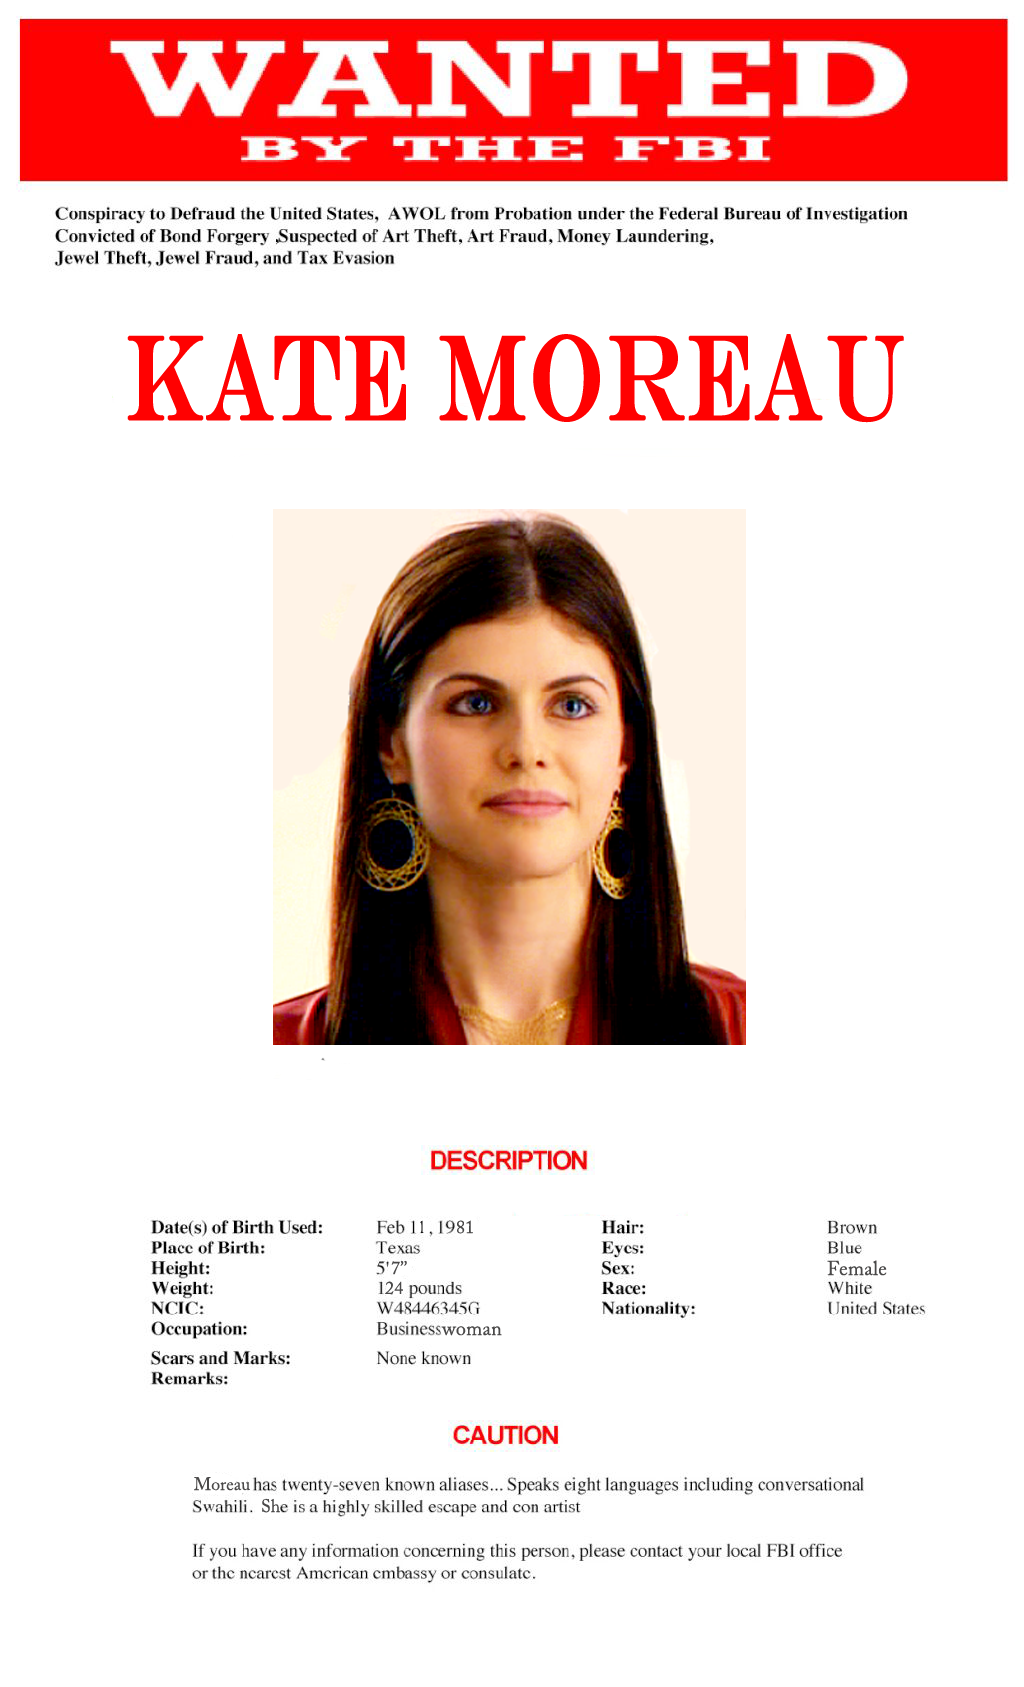 Wanted by the FBI Poster: Kate Moreau